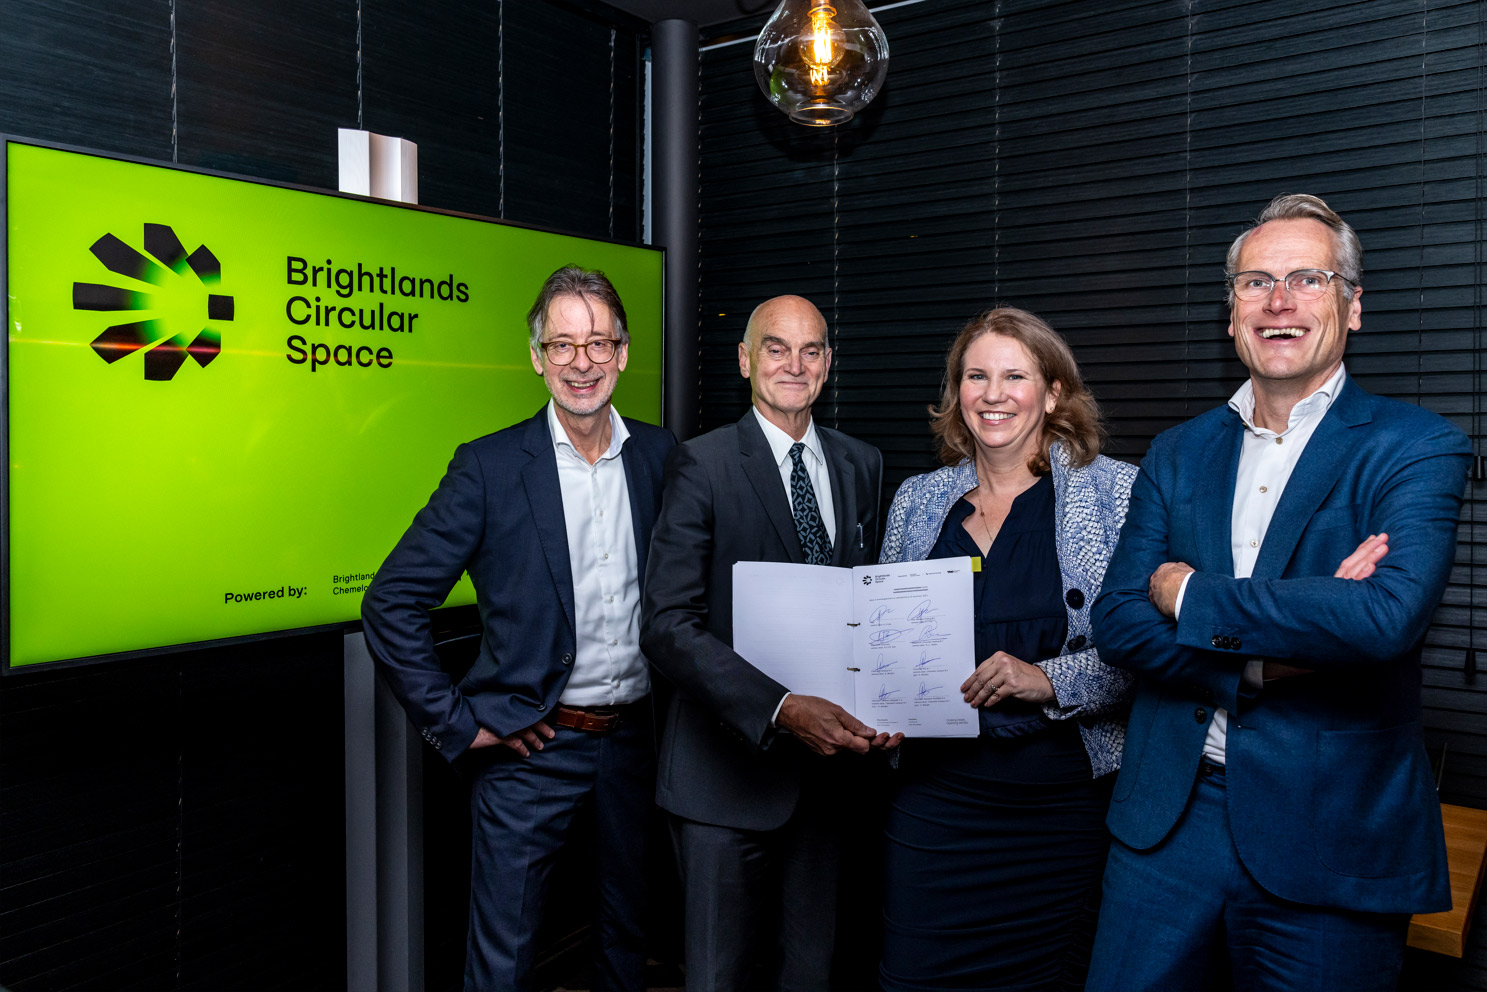 Signing of the Brightlands Circular Space agreements